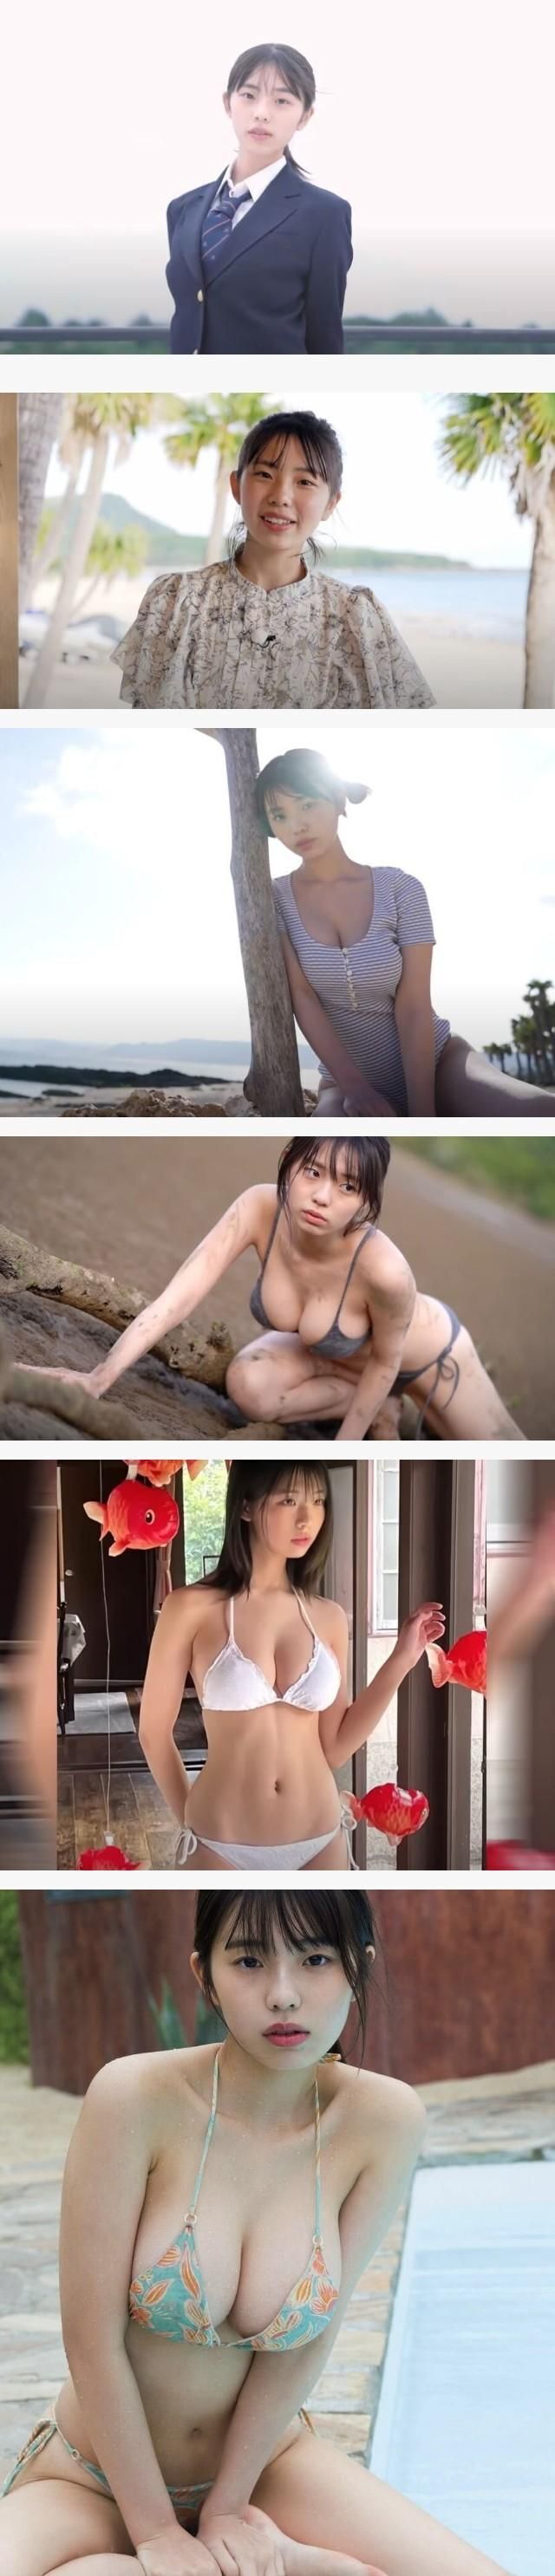 A Japanese high school girl born in 2004 and a gravure model with a twist